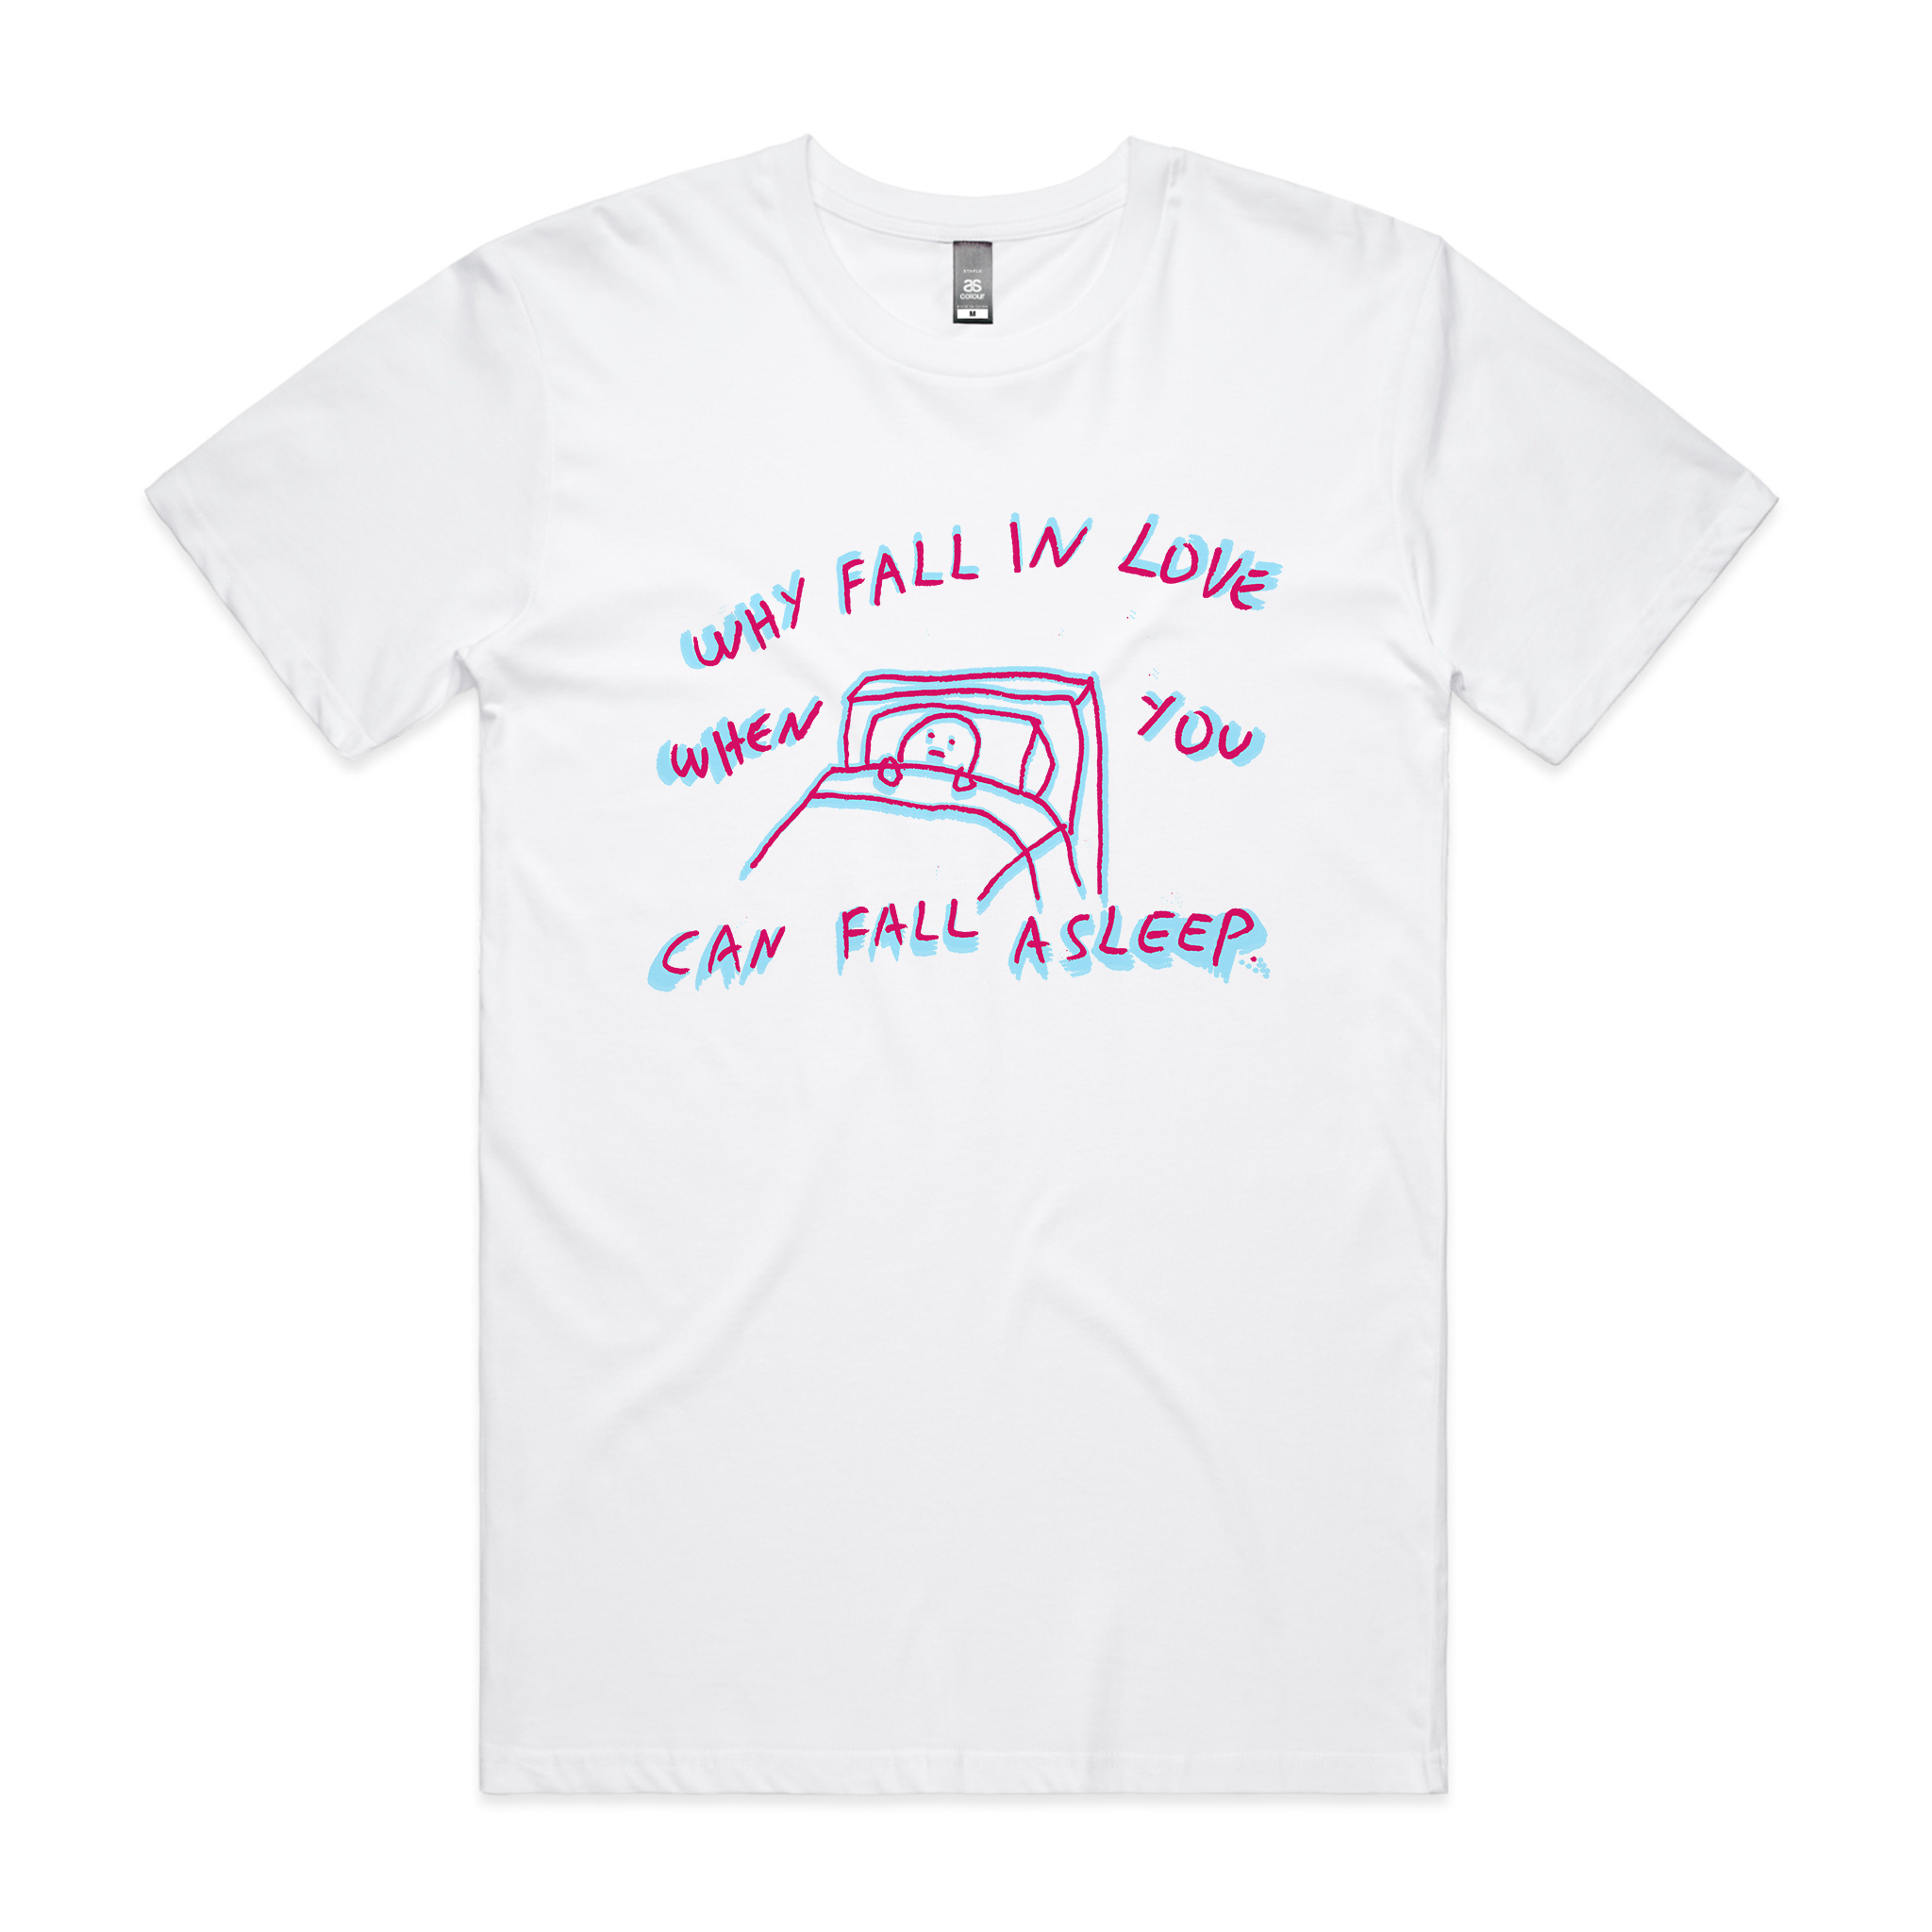 Why Fall In Love Tee